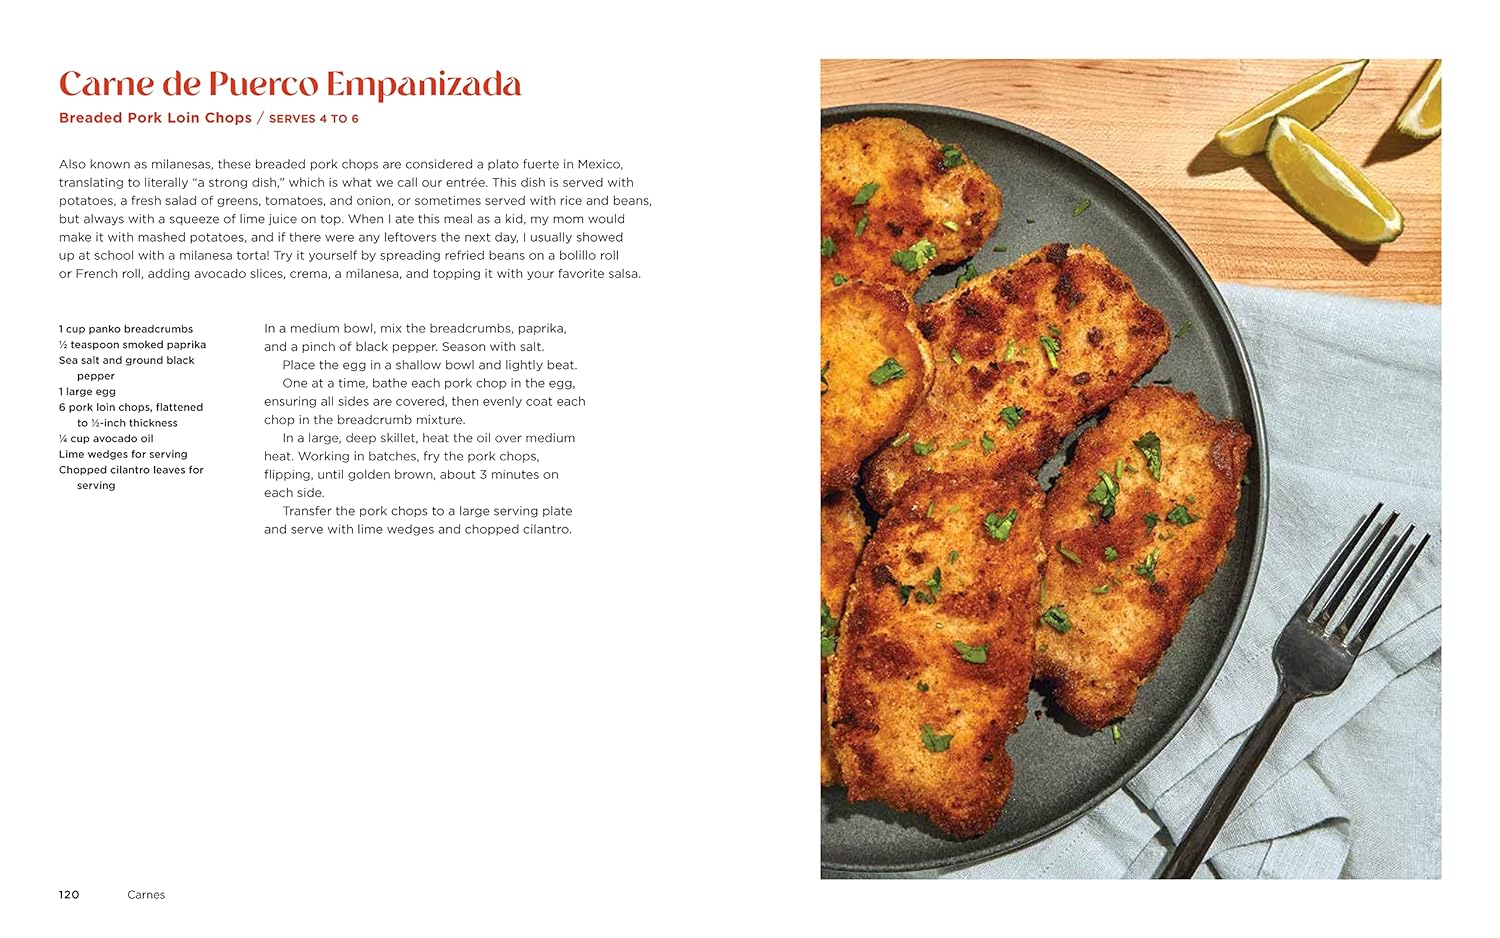 In this inspiring and creative Mexican cookbook, Andrea Pons takes you on a journey through flavor, family, and her immigration story. With 78 easy and delicious recipes from three generations of women in her family, this cookbook offers you a taste of authentic Mexican cuisine.